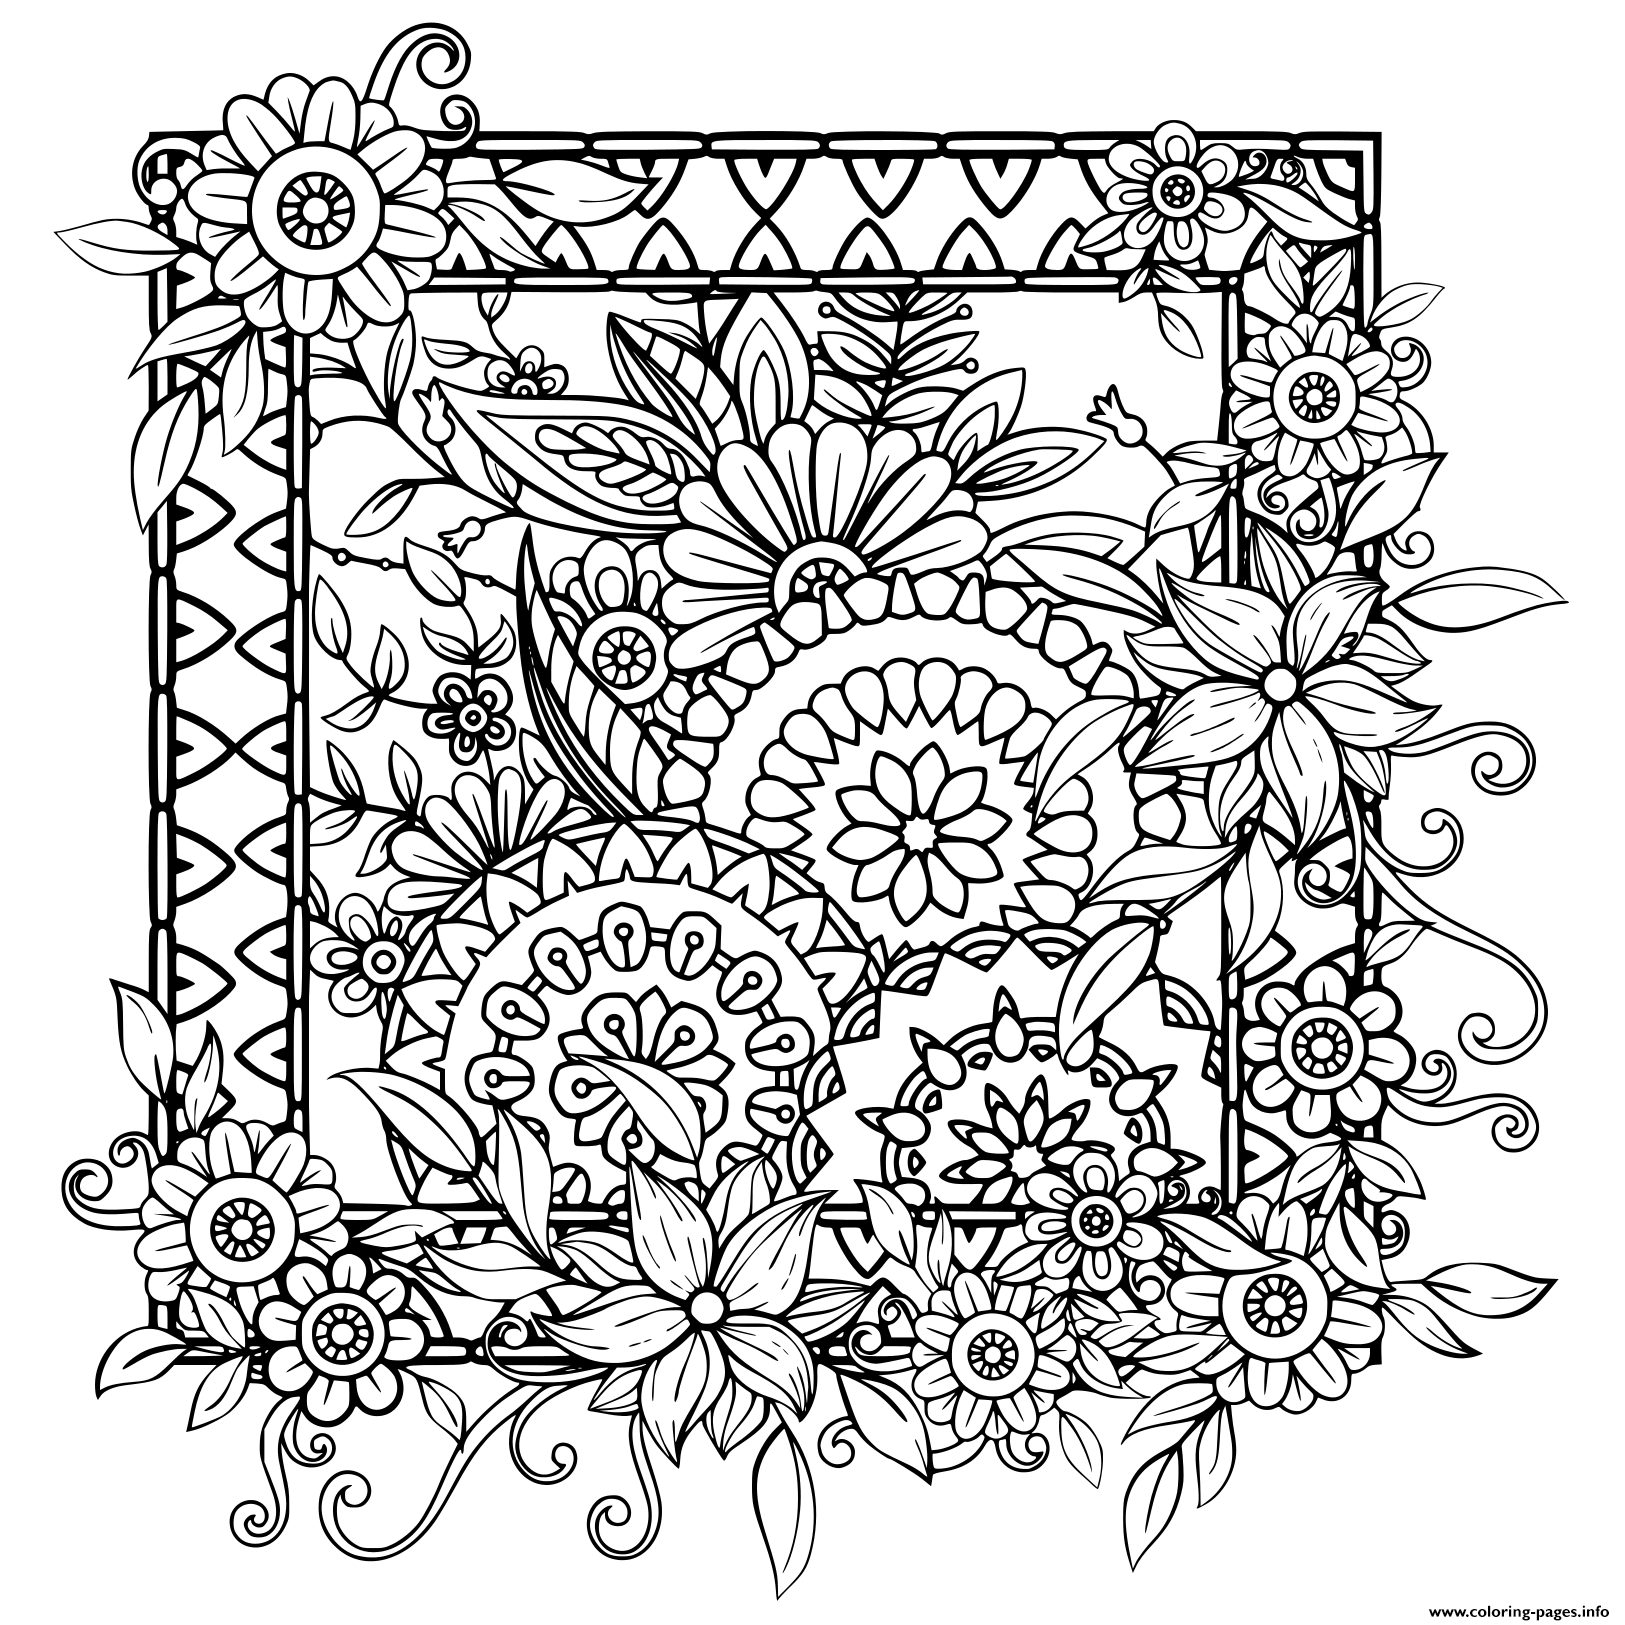 Pin on Free Adults Coloring Pages to Print